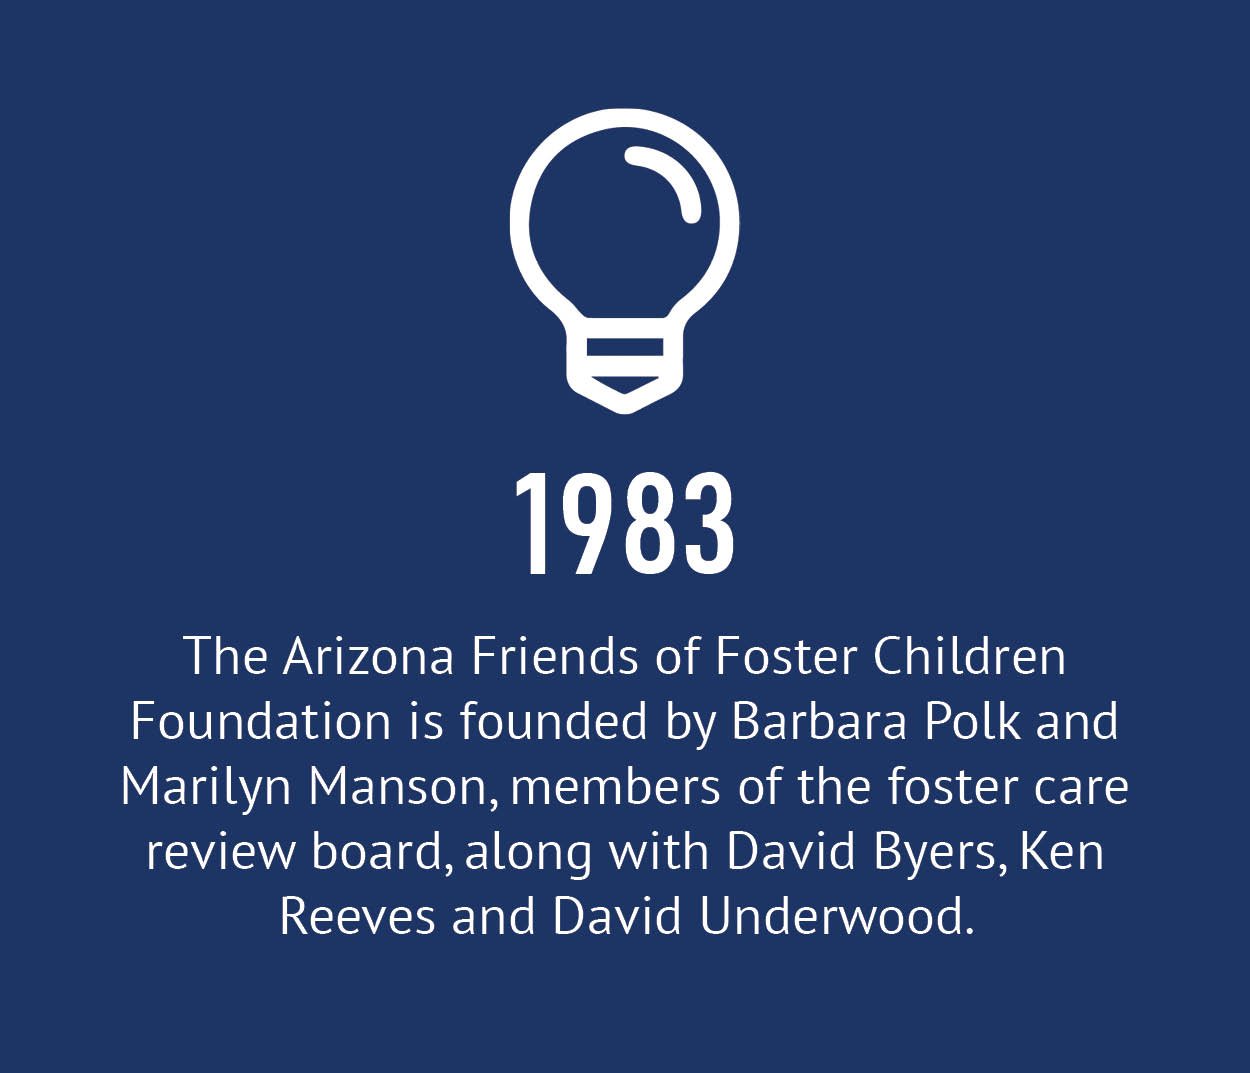 1983 - The Arizona Friends of Foster Children Foundation is founded by Barbara Polk and Marilyn Manson, members of the foster care review board, along with David Byers, Ken Reeves and David Underwood.